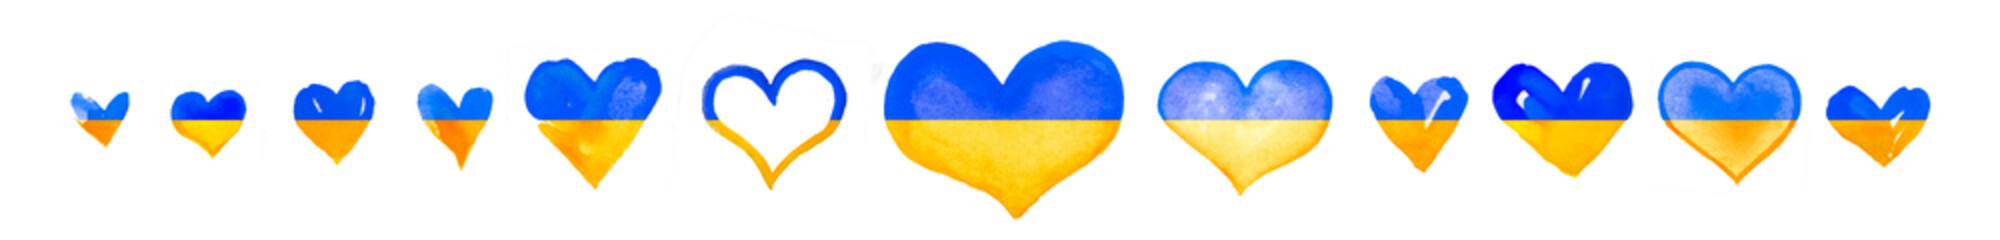 Ukraine flag. Set if Hearts of a Ukrainian without war. Heart of blue and yellow colors